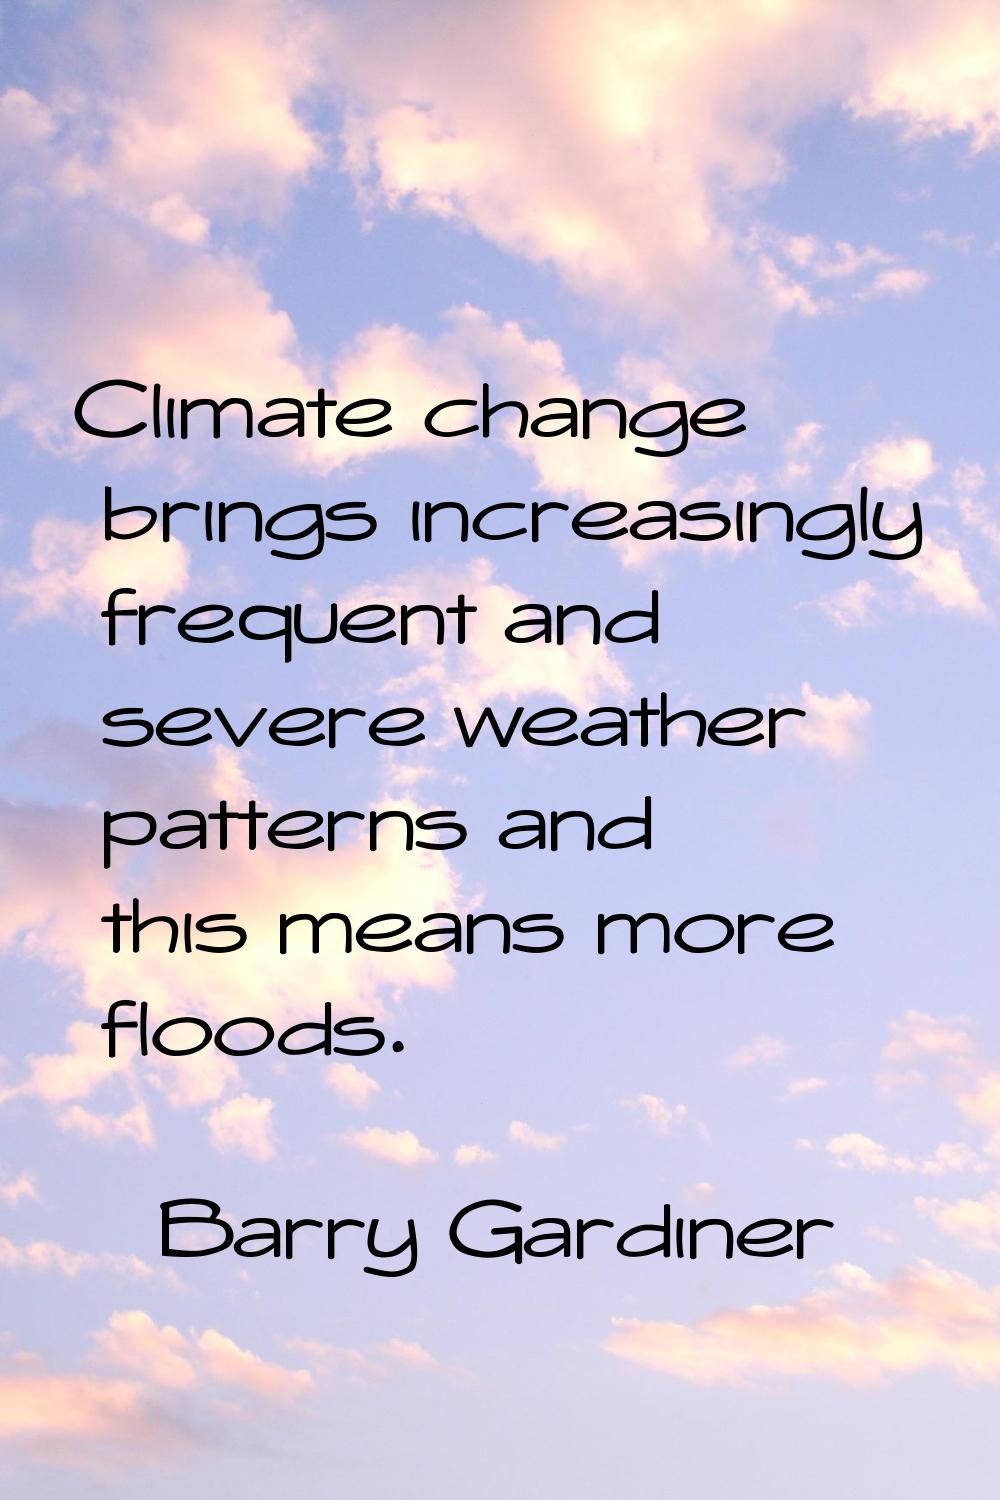 Climate change brings increasingly frequent and severe weather patterns and this means more floods.